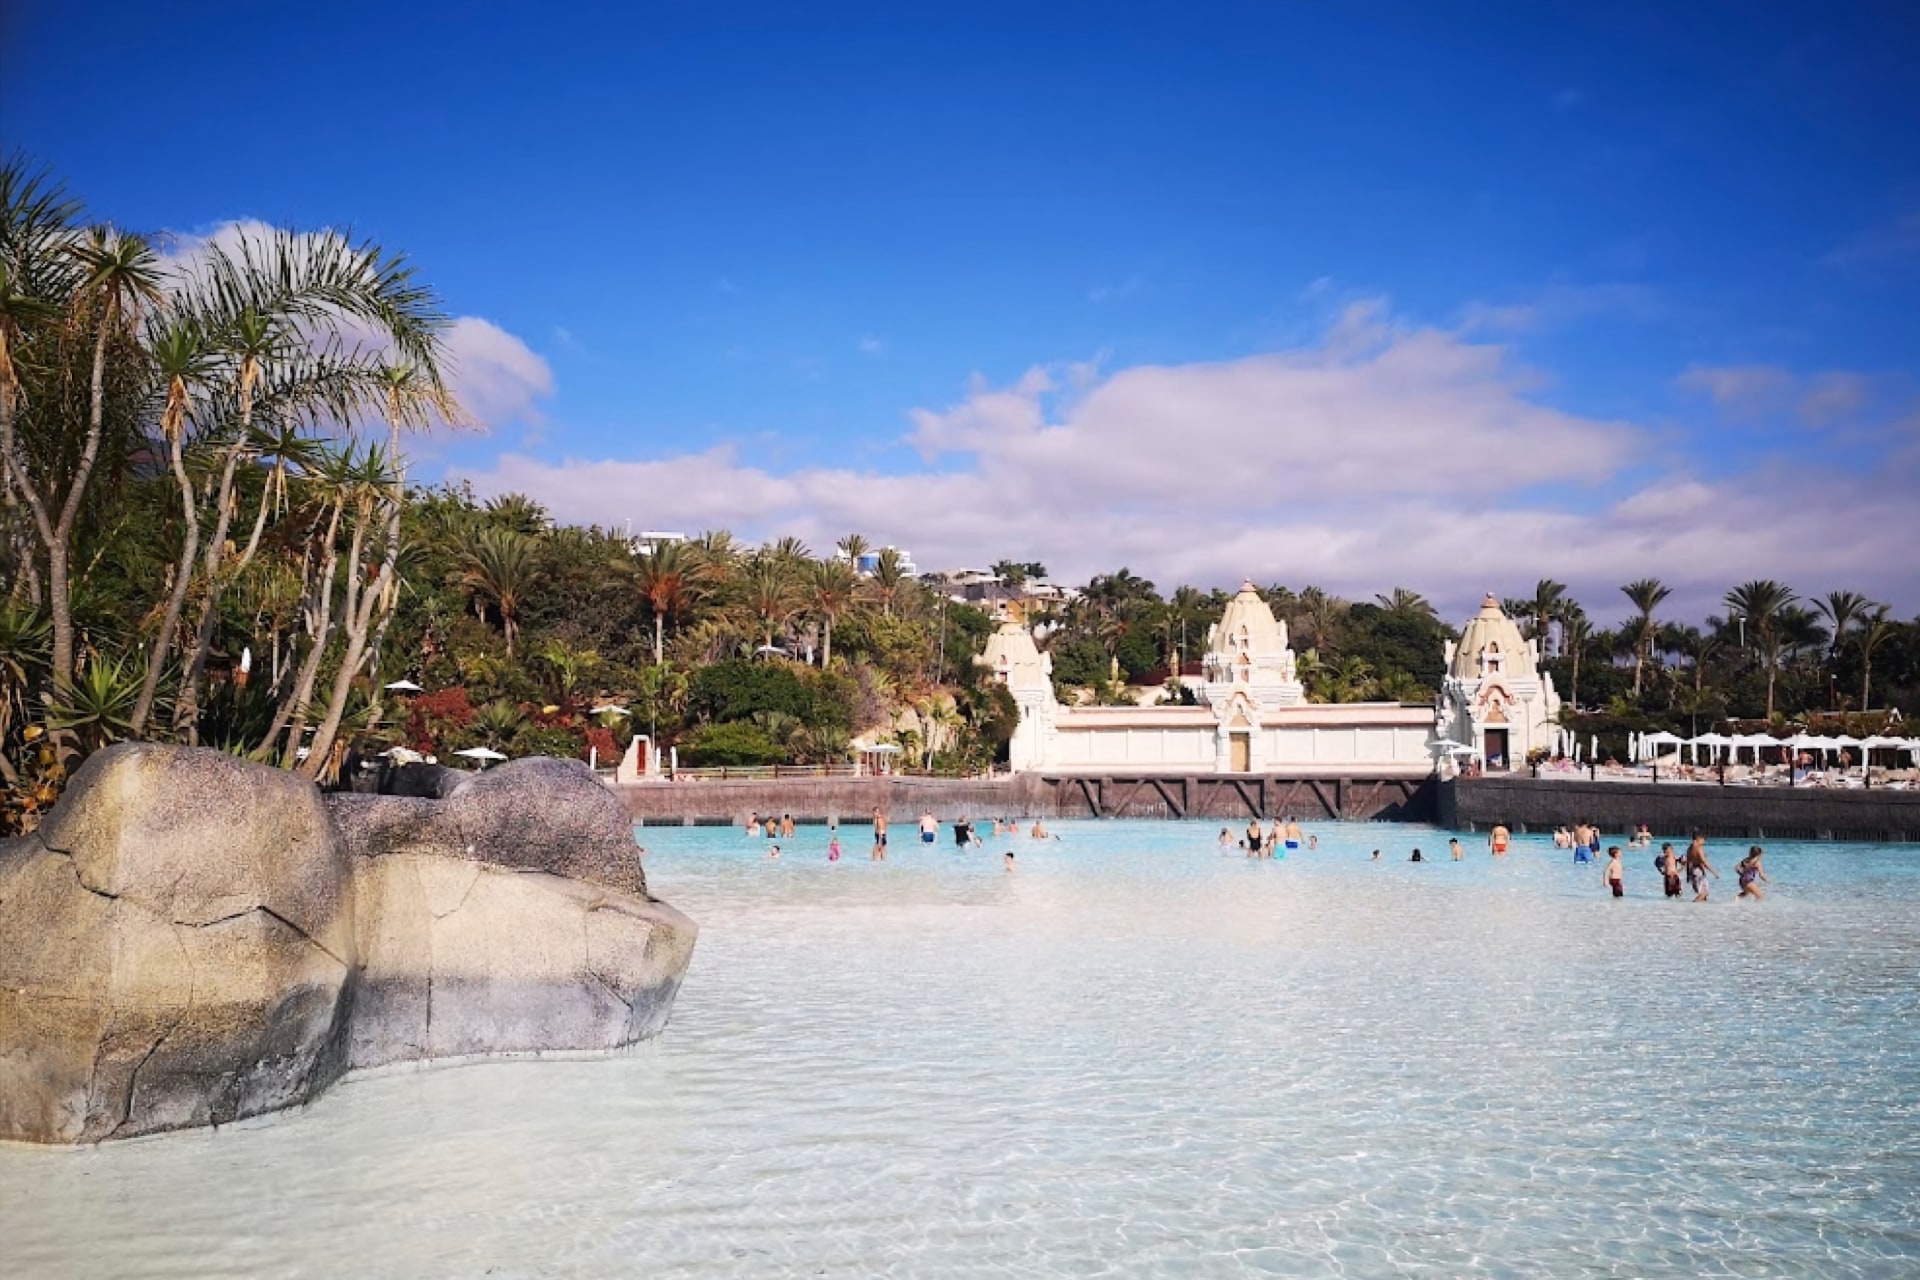 Sparkling blue water in a large swimming pool at Siam Park, Tenerife